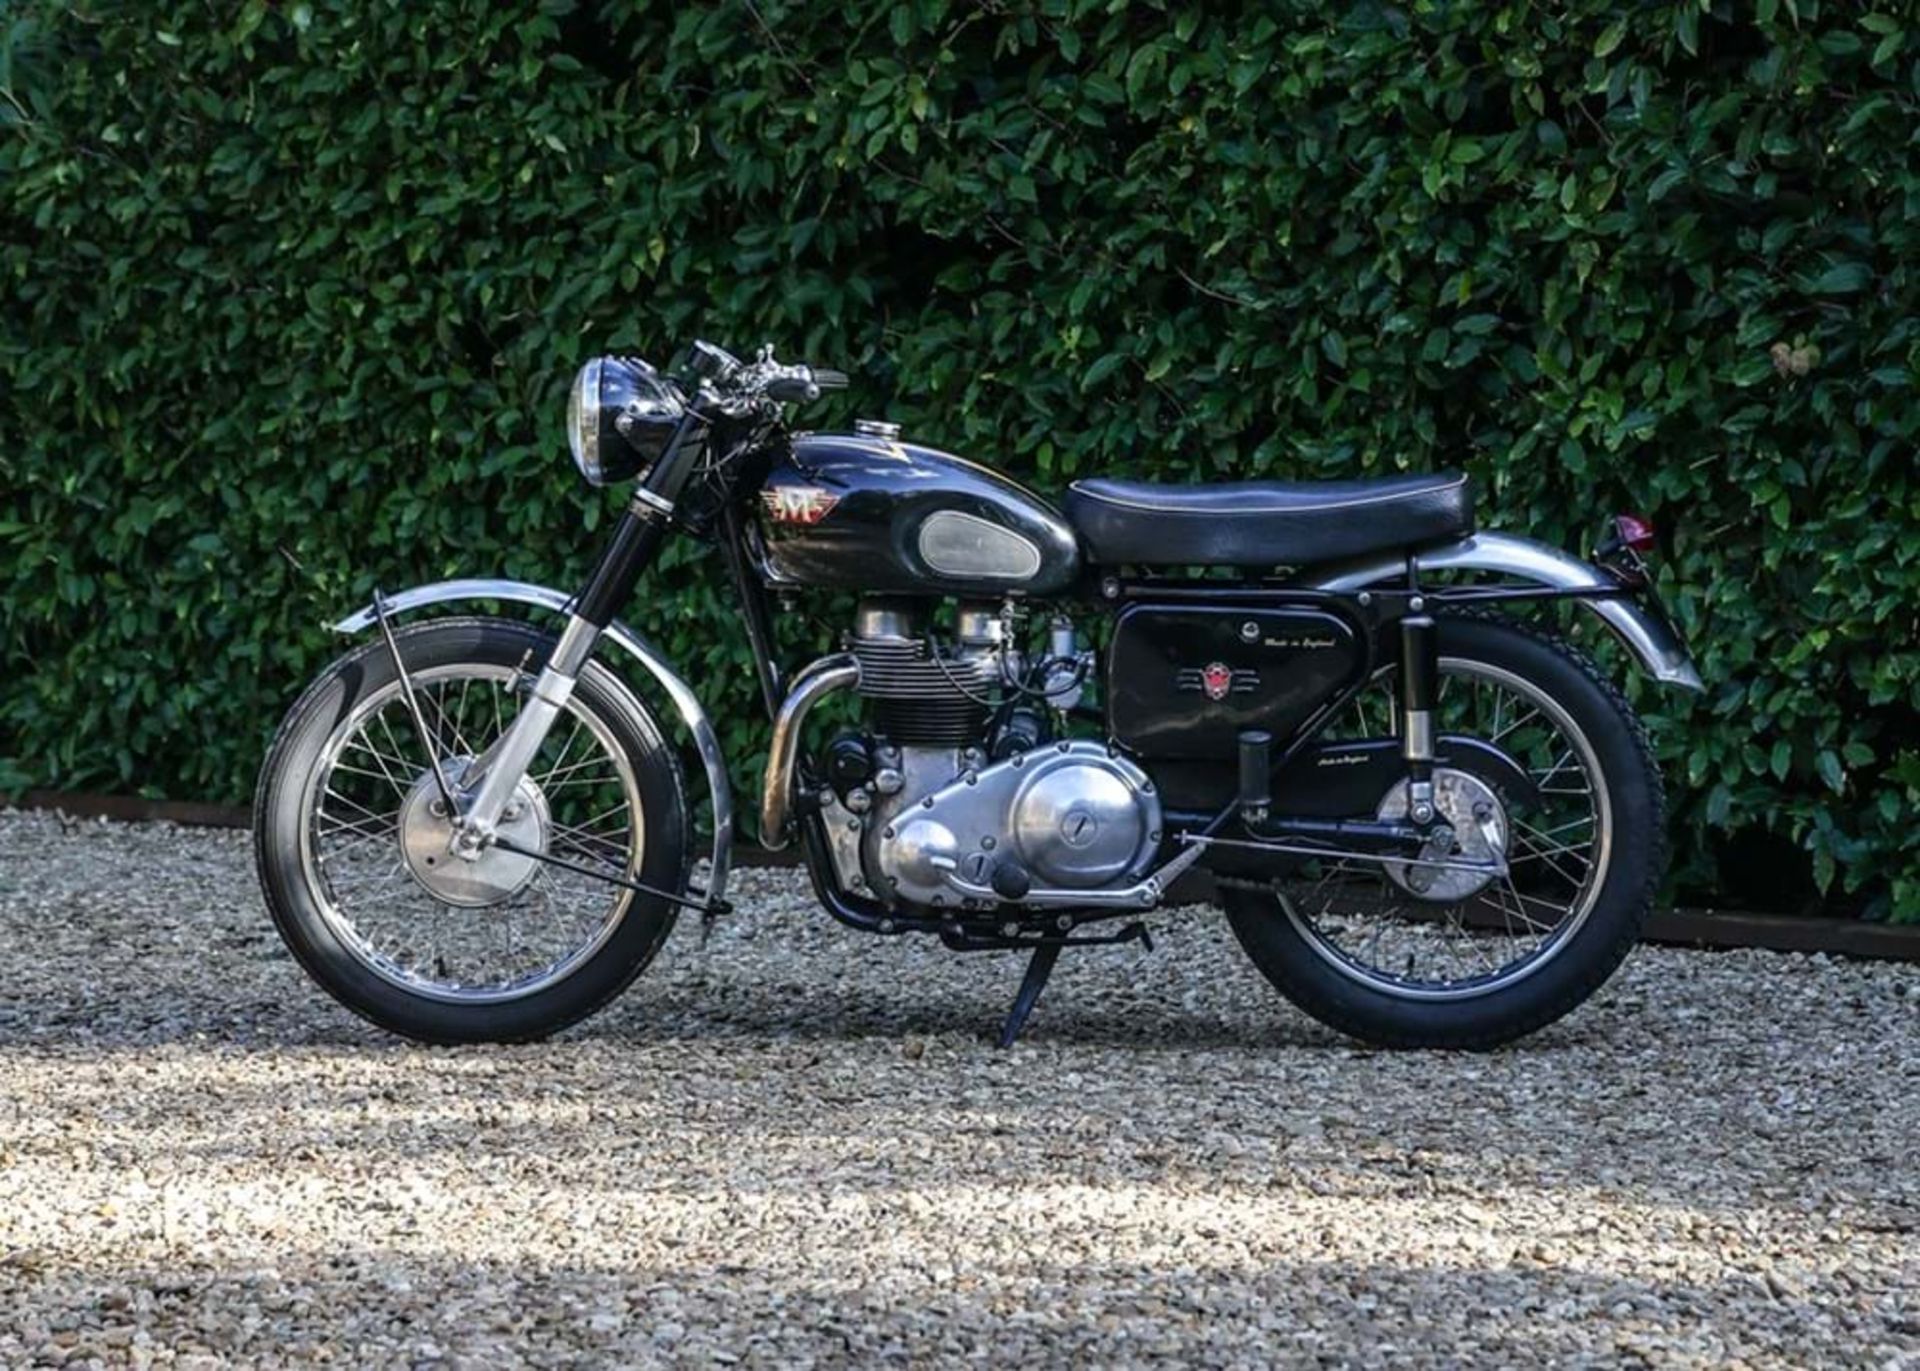 1961 Matchless G12 CSR (650cc) *WITHDRAWN* - Image 3 of 10